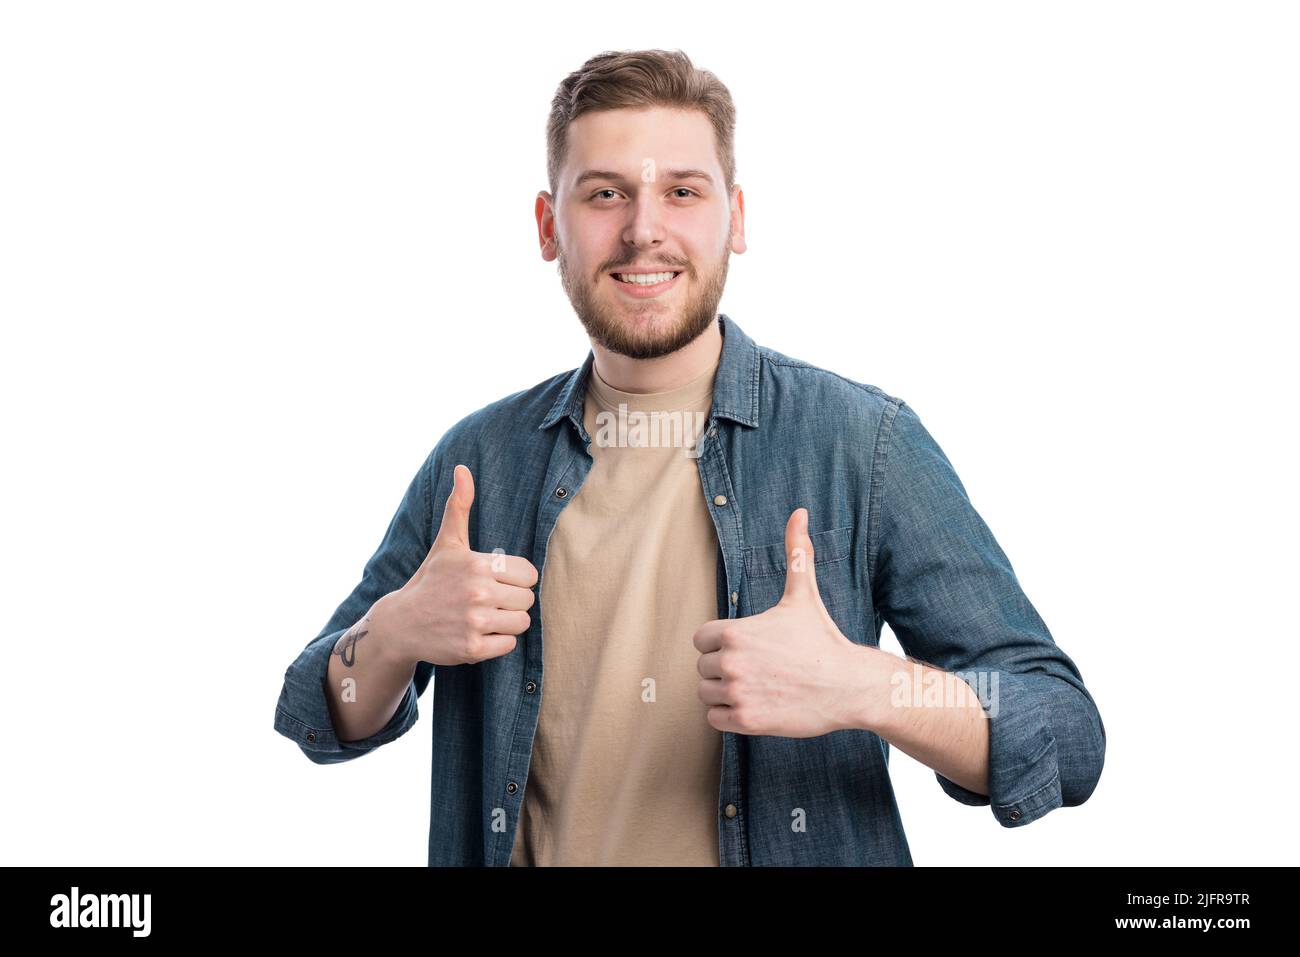 Happy man showing thumbs up Stock Photo